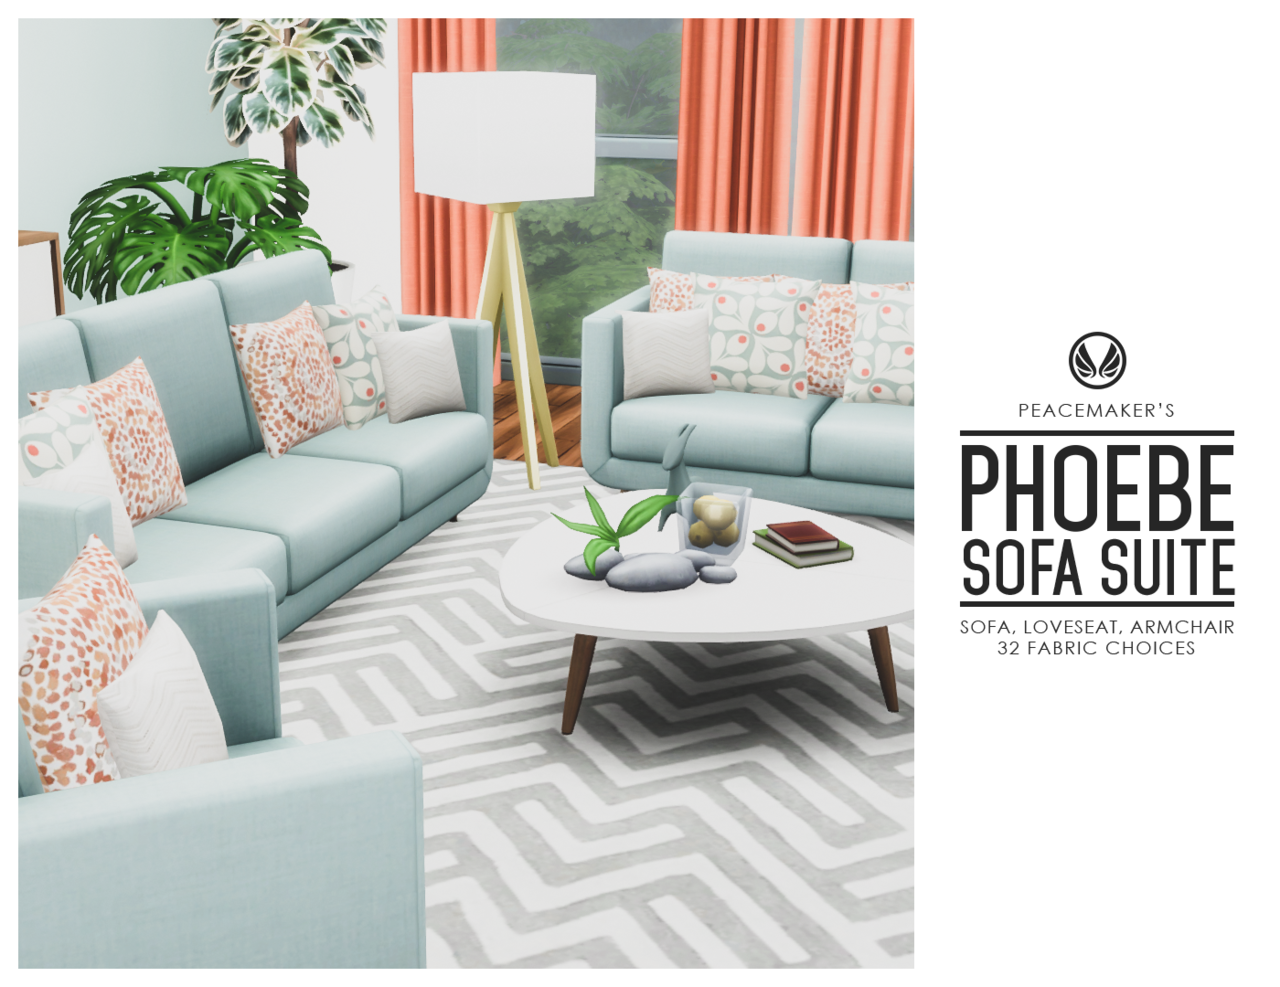 Phoebe Sofa Suite - Matching Sofa, Loveseat,& ArmchairYes, more sofas. This is actually the design slightly tweaked of course) that I have at home and love the slight roundness of the design. It’s a blank canvas and works for different styles which I...